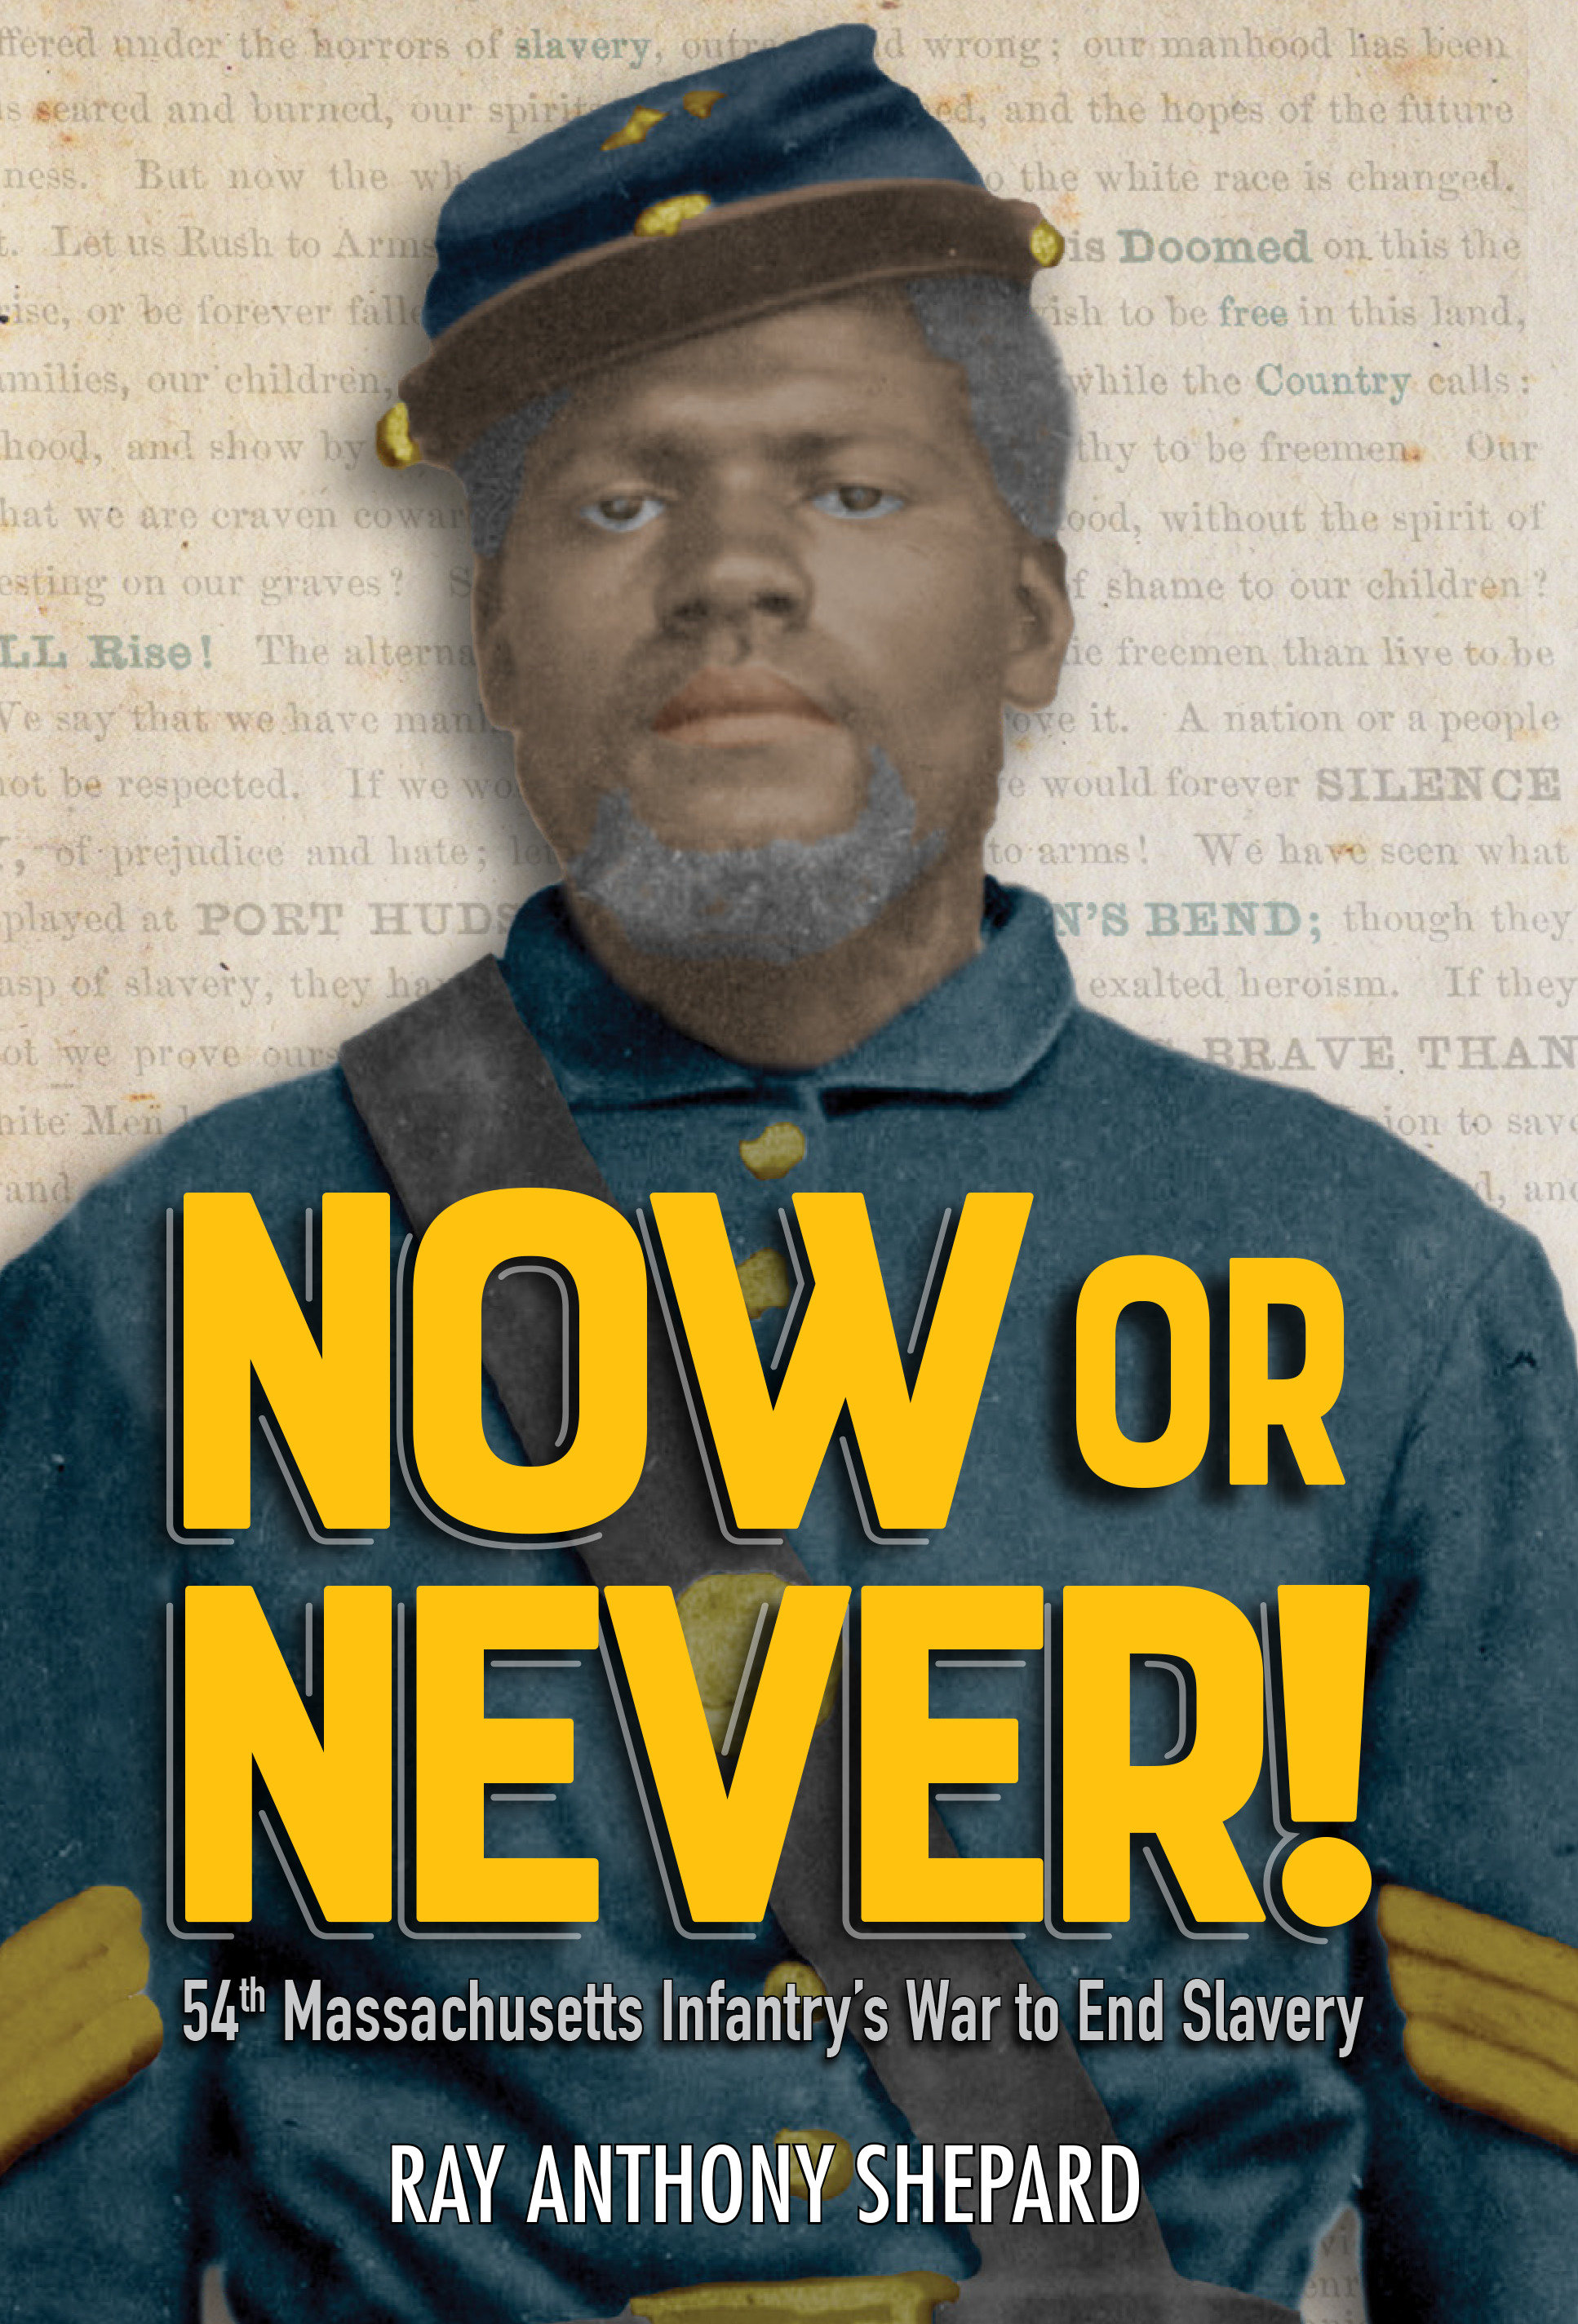 Now Or Never! (Hardcover Book)